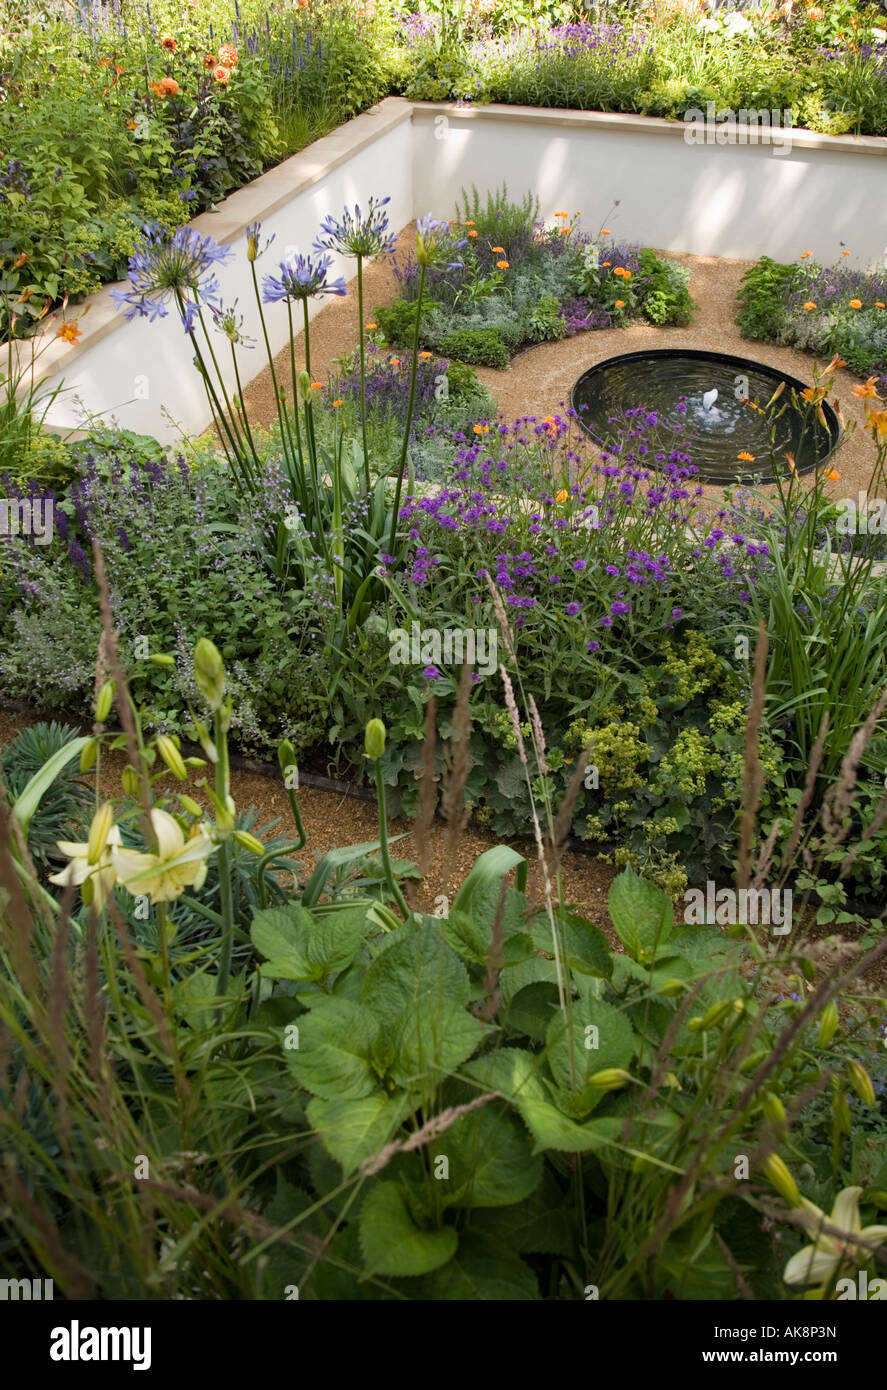 Pictures of the Homebase Reflection garden designed by Thomas Hoblyn at the Hampton Court Flower Show Stock Photo